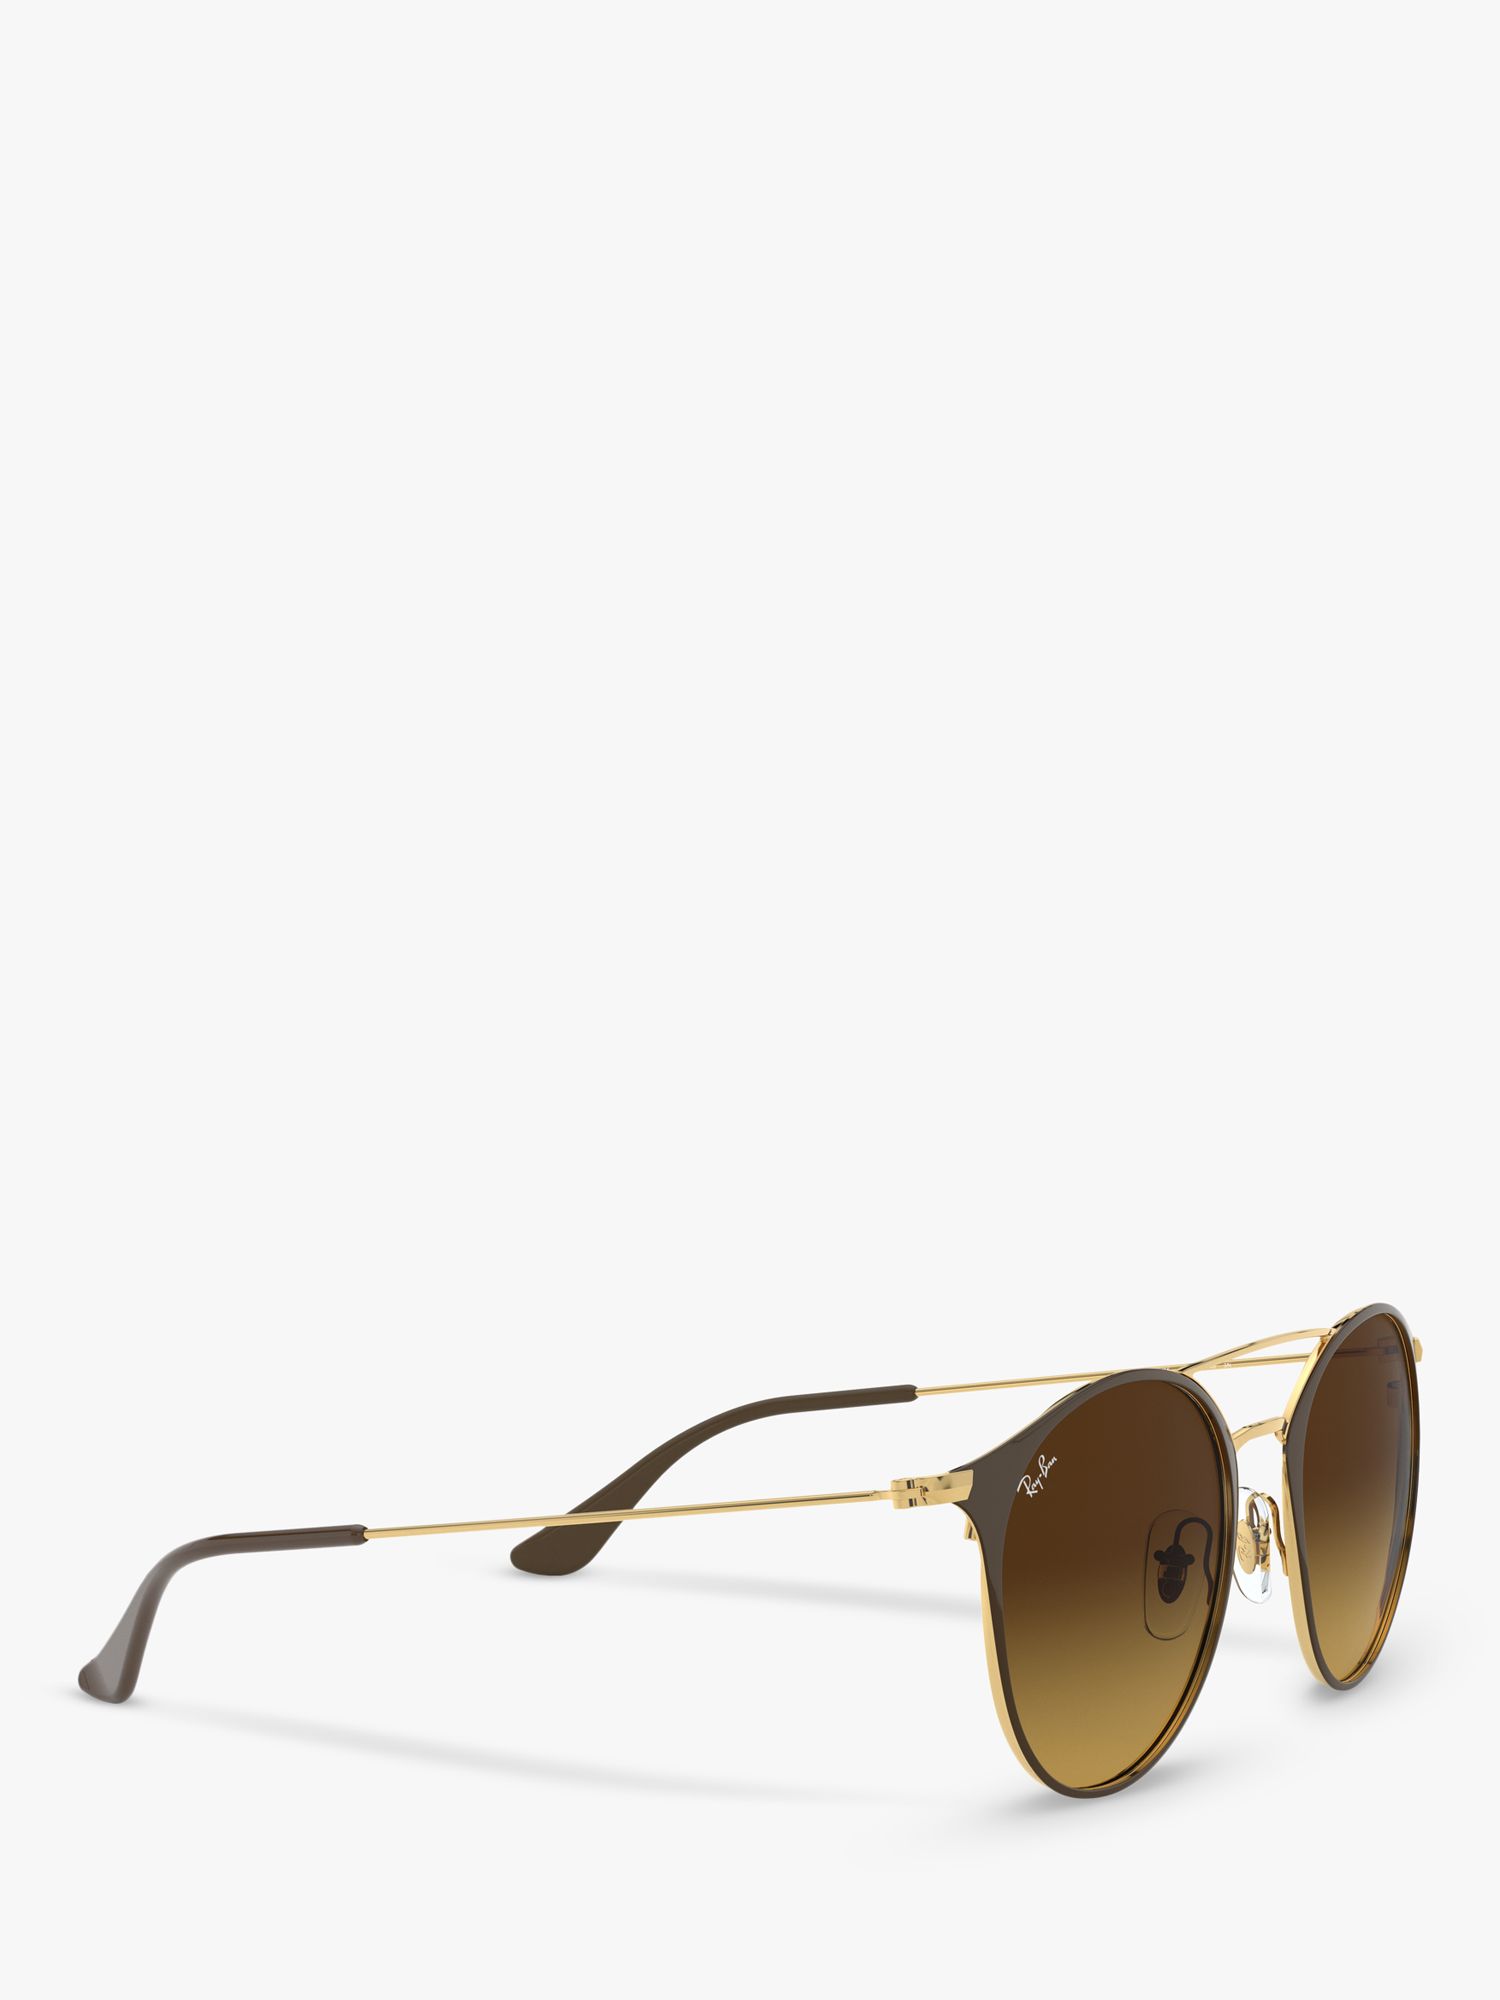 Ray-Ban RB3546 Unisex Round Sunglasses, Brown/Gold/Brown Gradient at John  Lewis & Partners